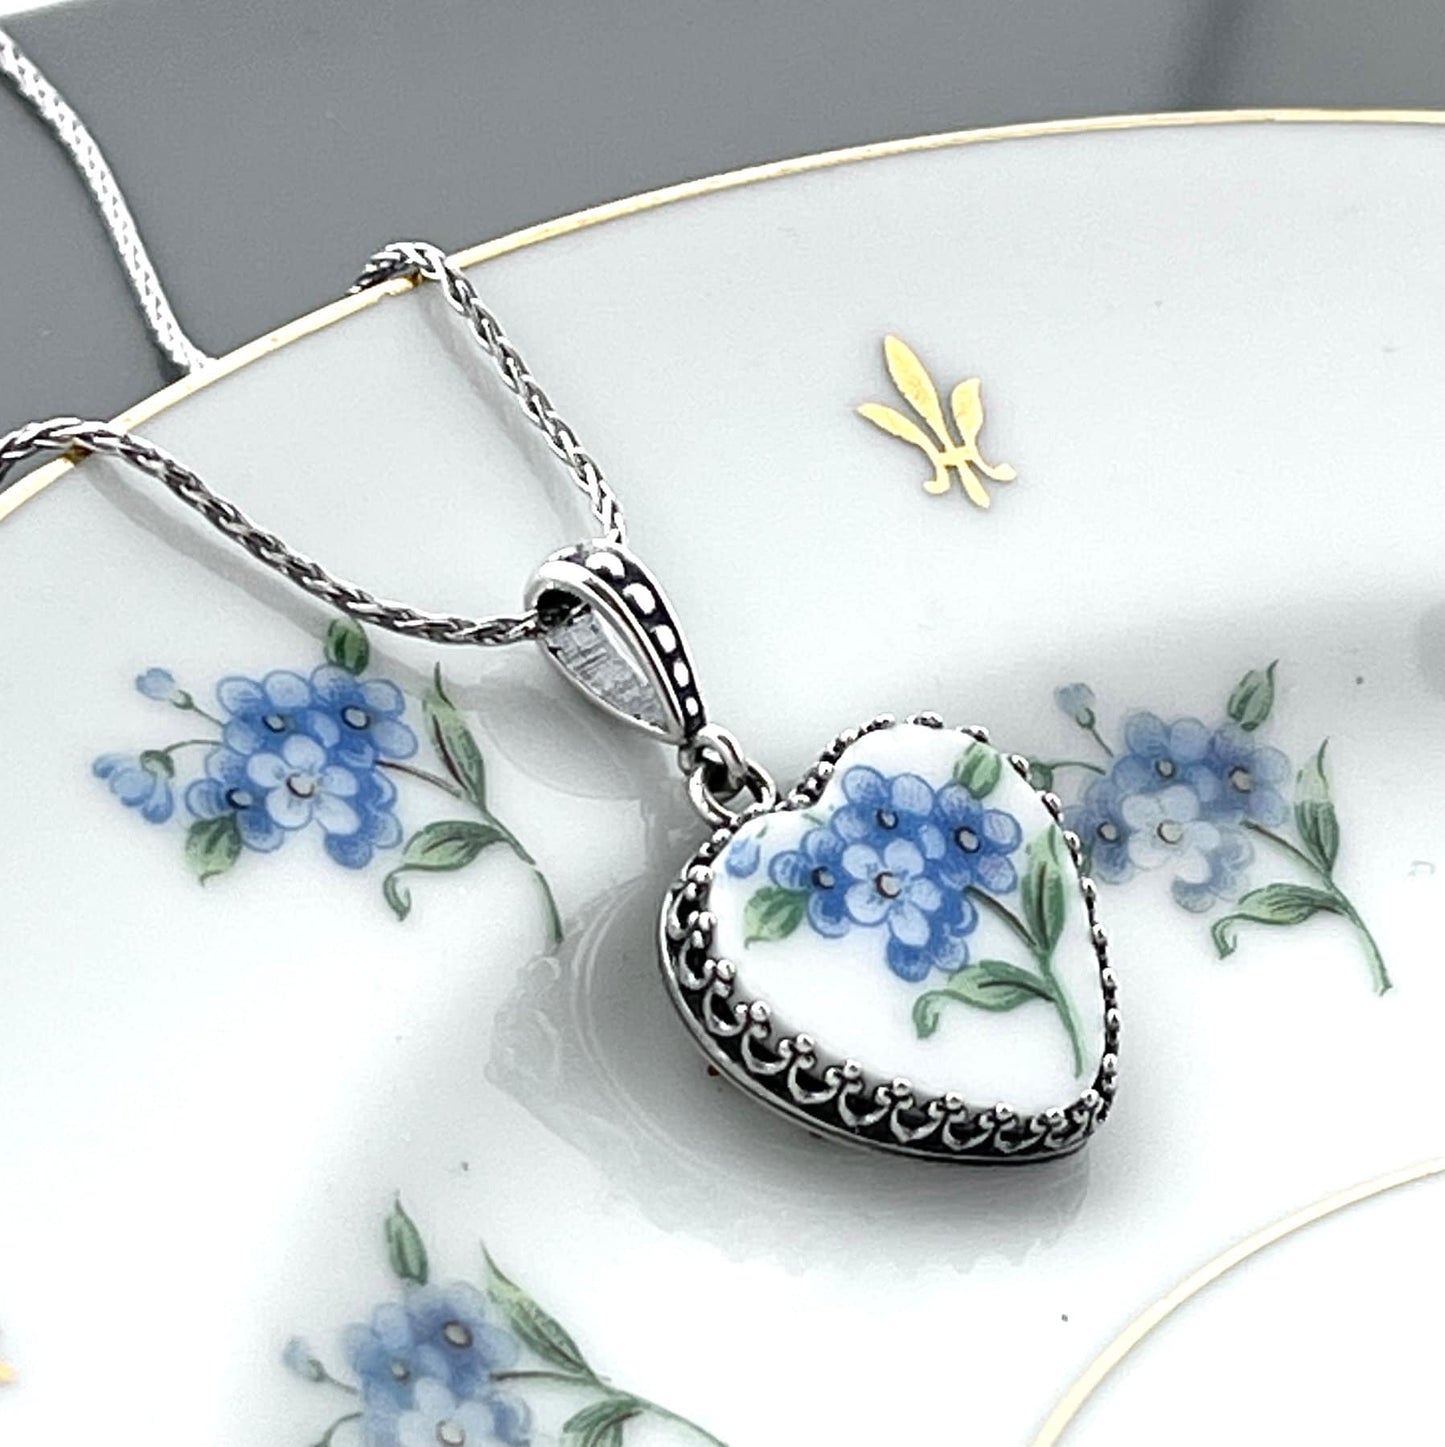 Forget Me Not China Jewelry Set, Romantic 20th Anniversary China Gift for Wife, Silver Necklace and Earrings, Gifts for Women